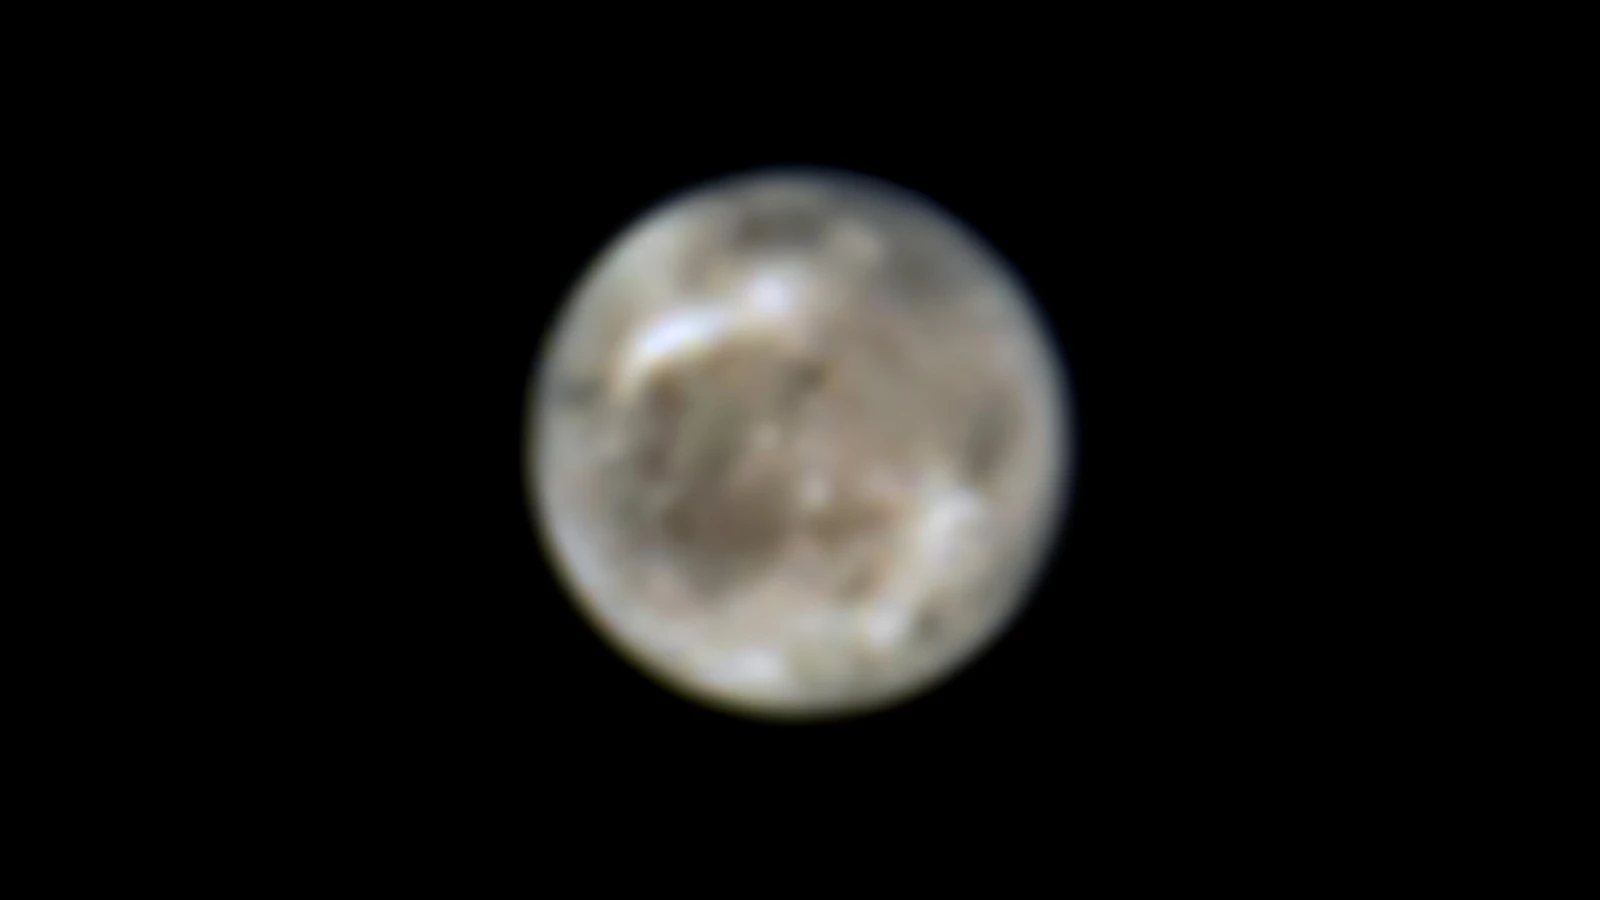 Hubble spotted the first signs of water vapour on Ganymede